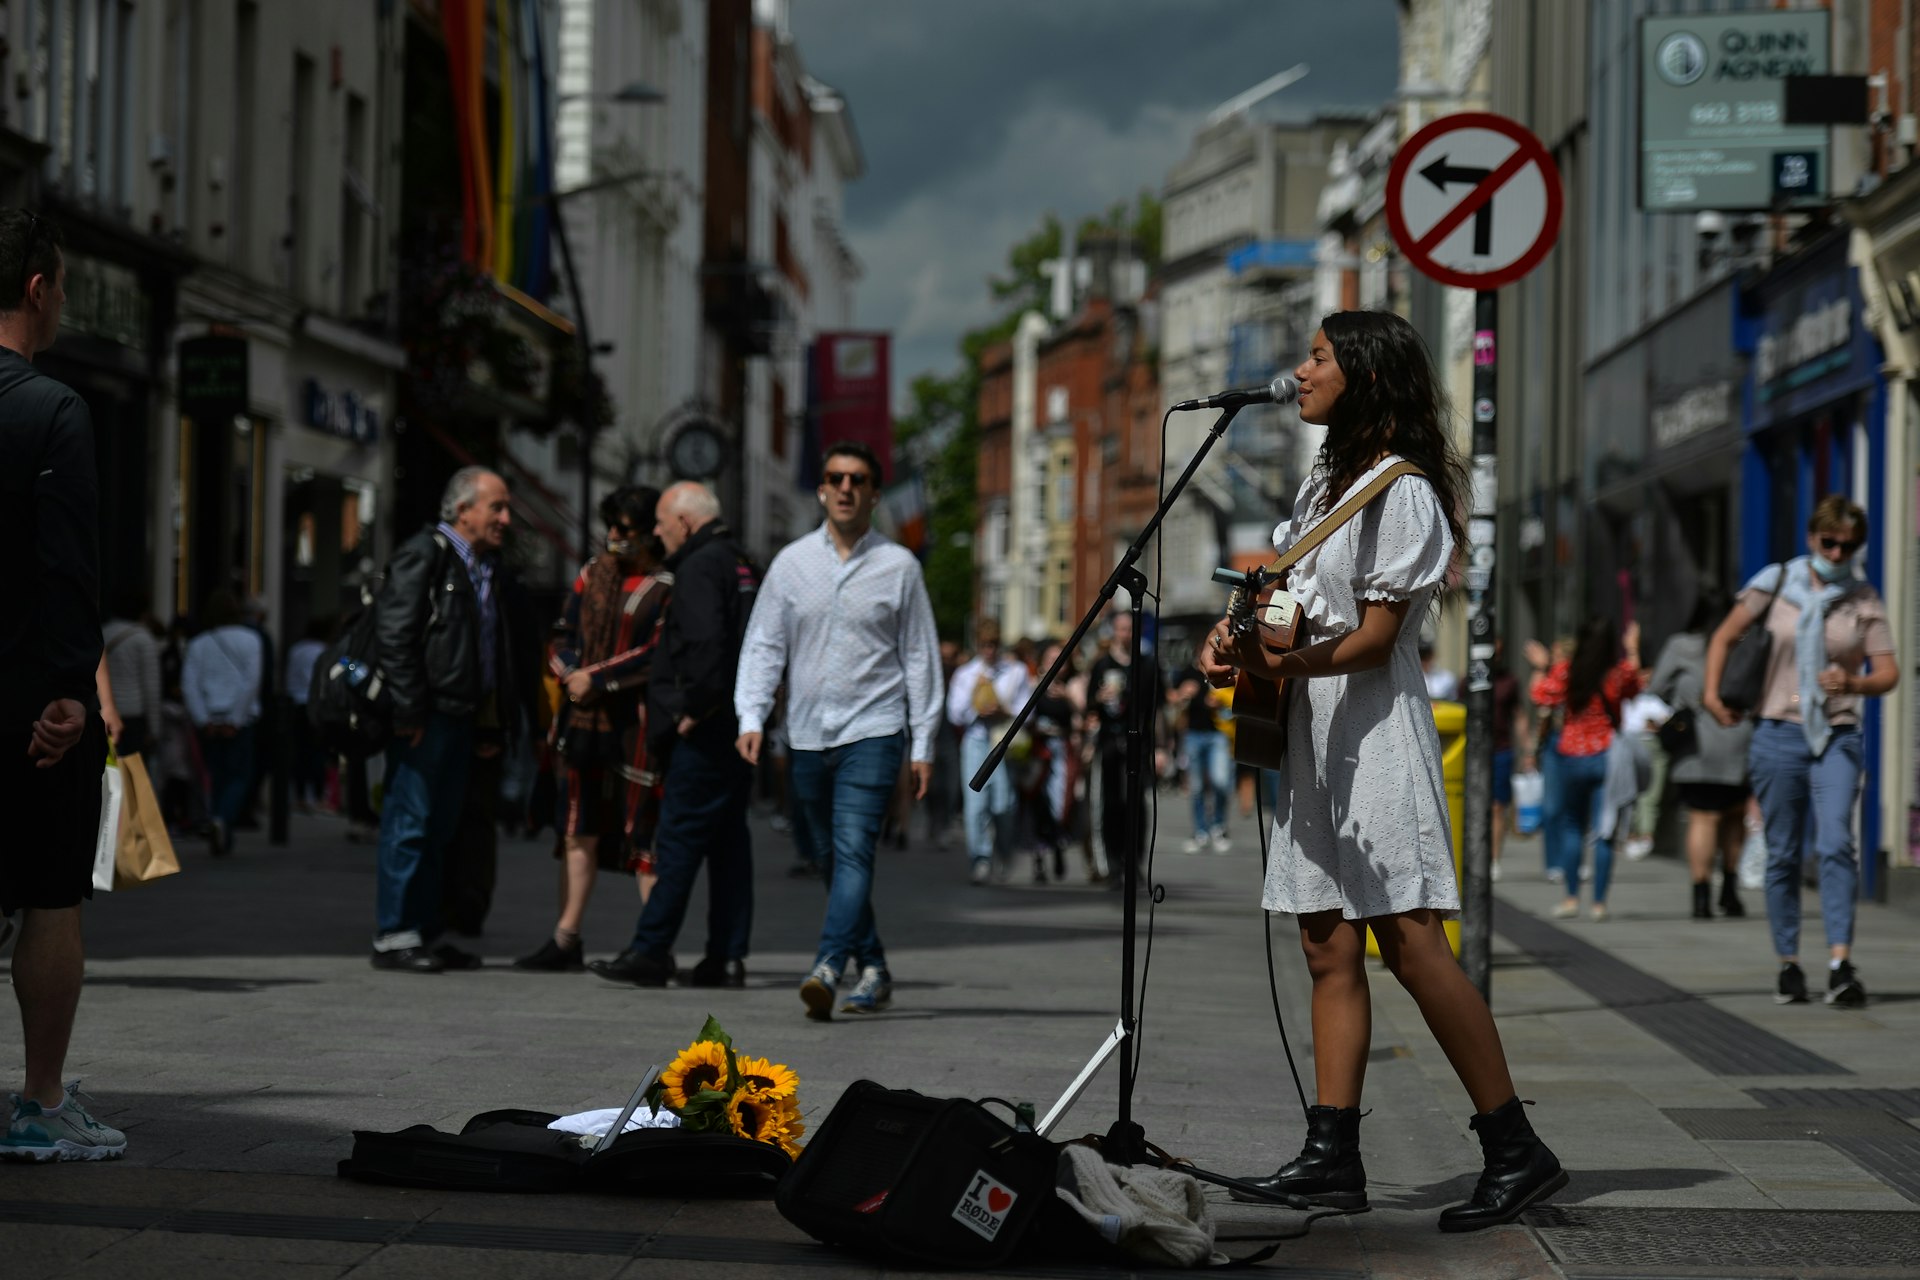 Musician and singer Emmeline Gracie performing on Grafton St in Dublin, Ireland